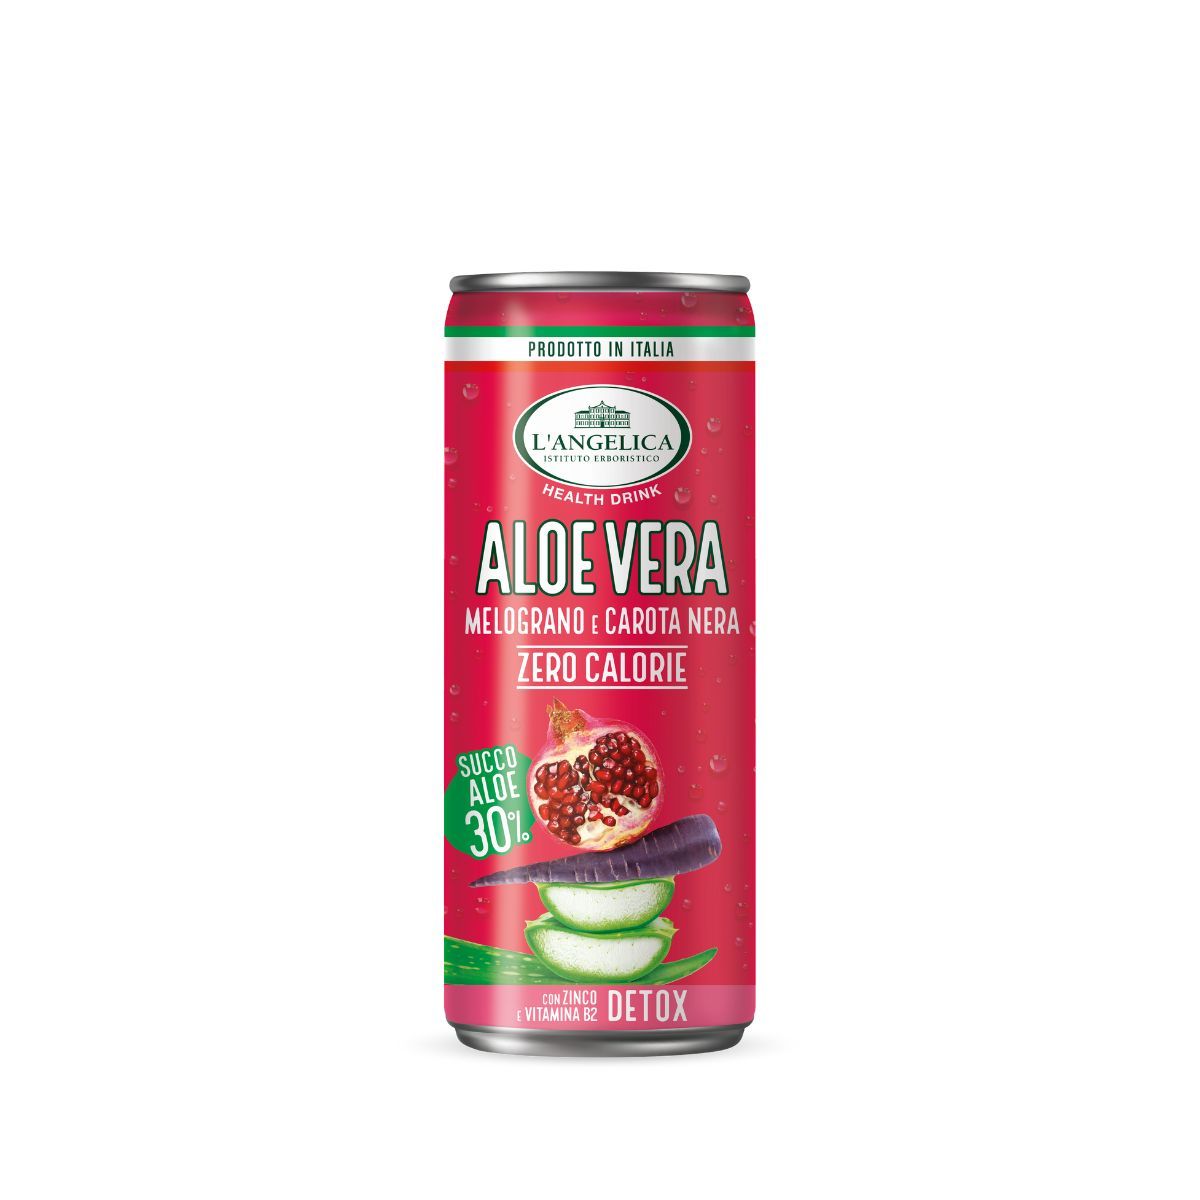 Aloe Vera Drink 30% in cans - Pomegranate and black carrot